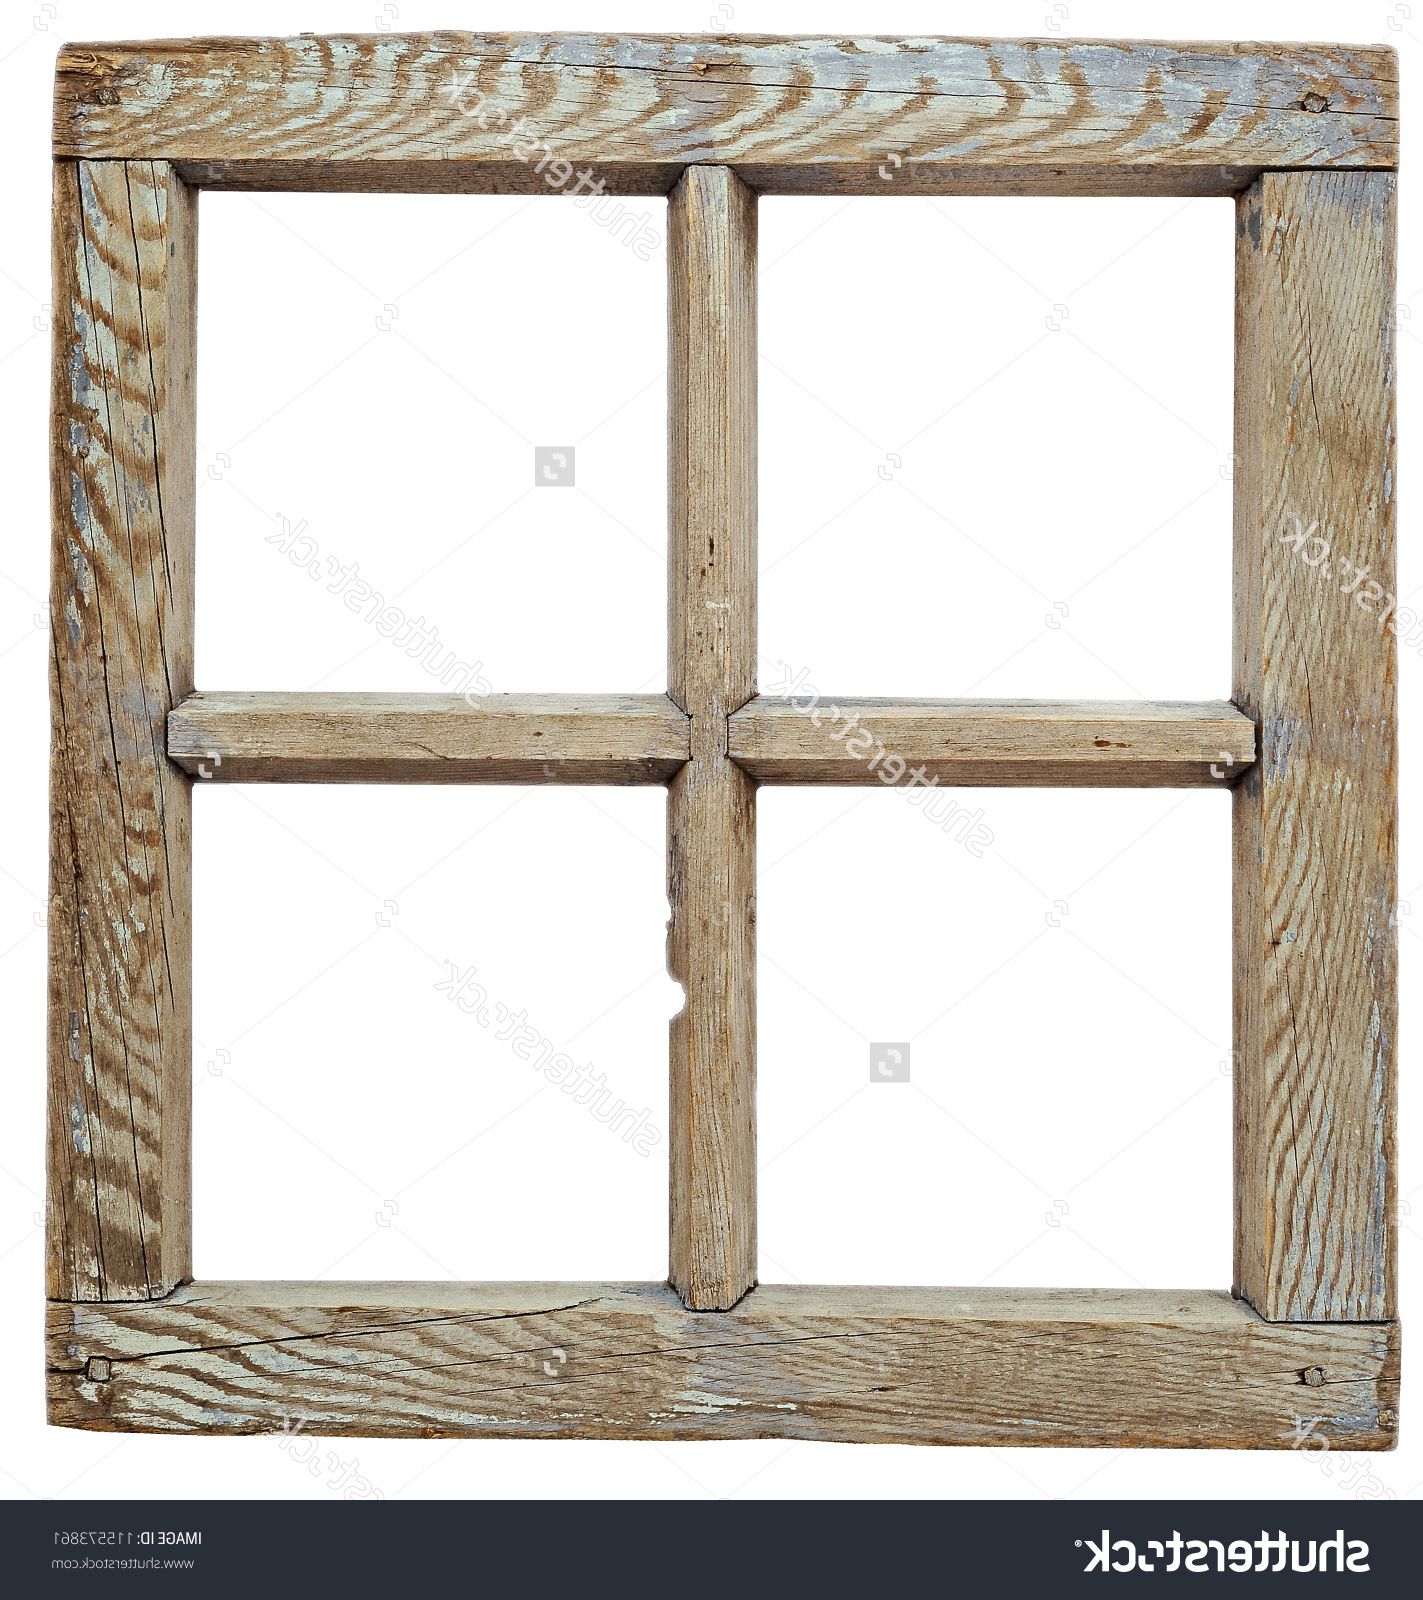 Old Rustic Barn Window Frame For 2020 Old Wooden Window Frames With Best Ways To Use Windows As Ideas For (View 8 of 20)